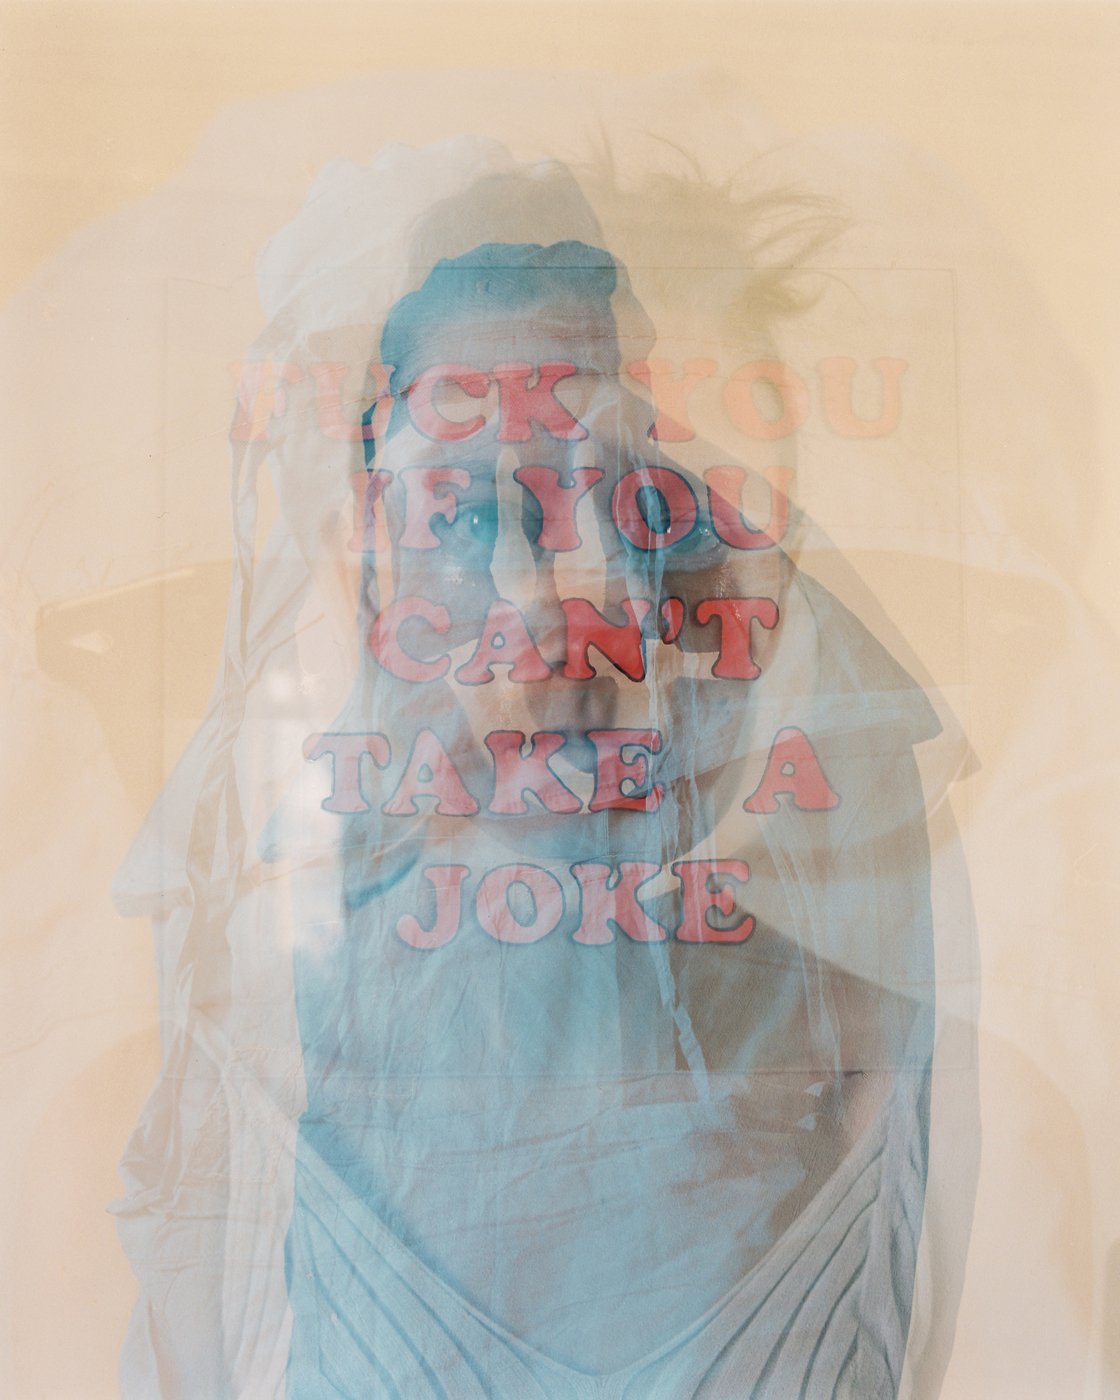 <p><span>Natasha Pyatnitsa took this photo as part of her self-isolation diary during the Covid-19 pandemic. Multiple exposure was an accident: a few portraits of her boyfriend wearing a hazmat suit, a picture of a drawing and her self-portrait crying all ended up merged and layered. “In the state of confusion and rush we sometimes get shots which were not planned but possibly dictated by our subconscious. And behind all the protective barriers we create between ourselves and the world, there are the cathartic minutes of despair and powerlessness,” the photographer says.</span></p>